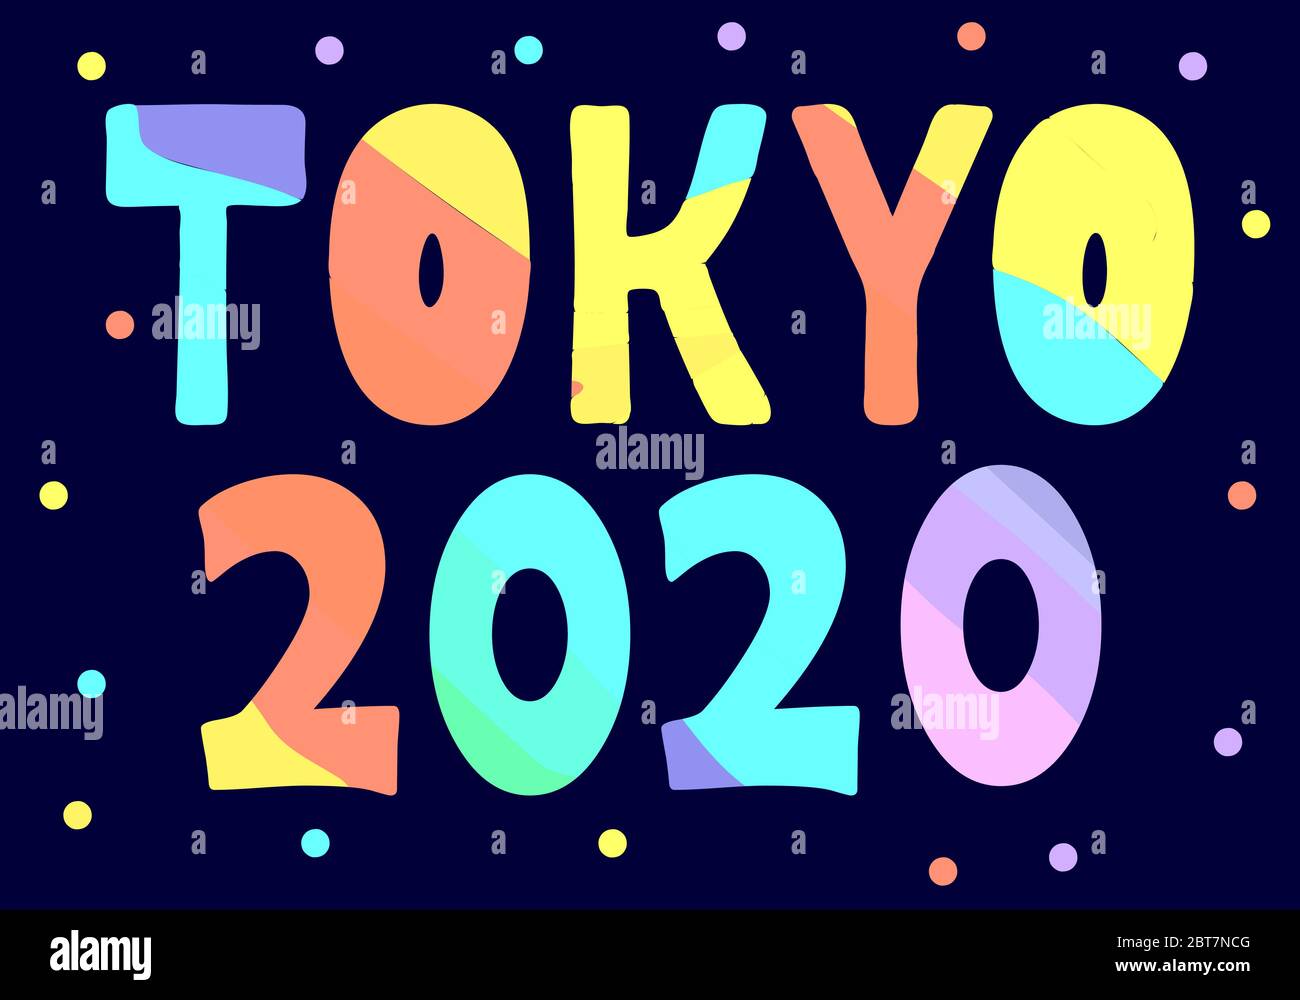 Tokyo 2020 - multicolored funny cartoon isolated inscription. Tokyo is the capital of Japan. For banners, posters, souvenirs and prints on clothing. Stock Vector